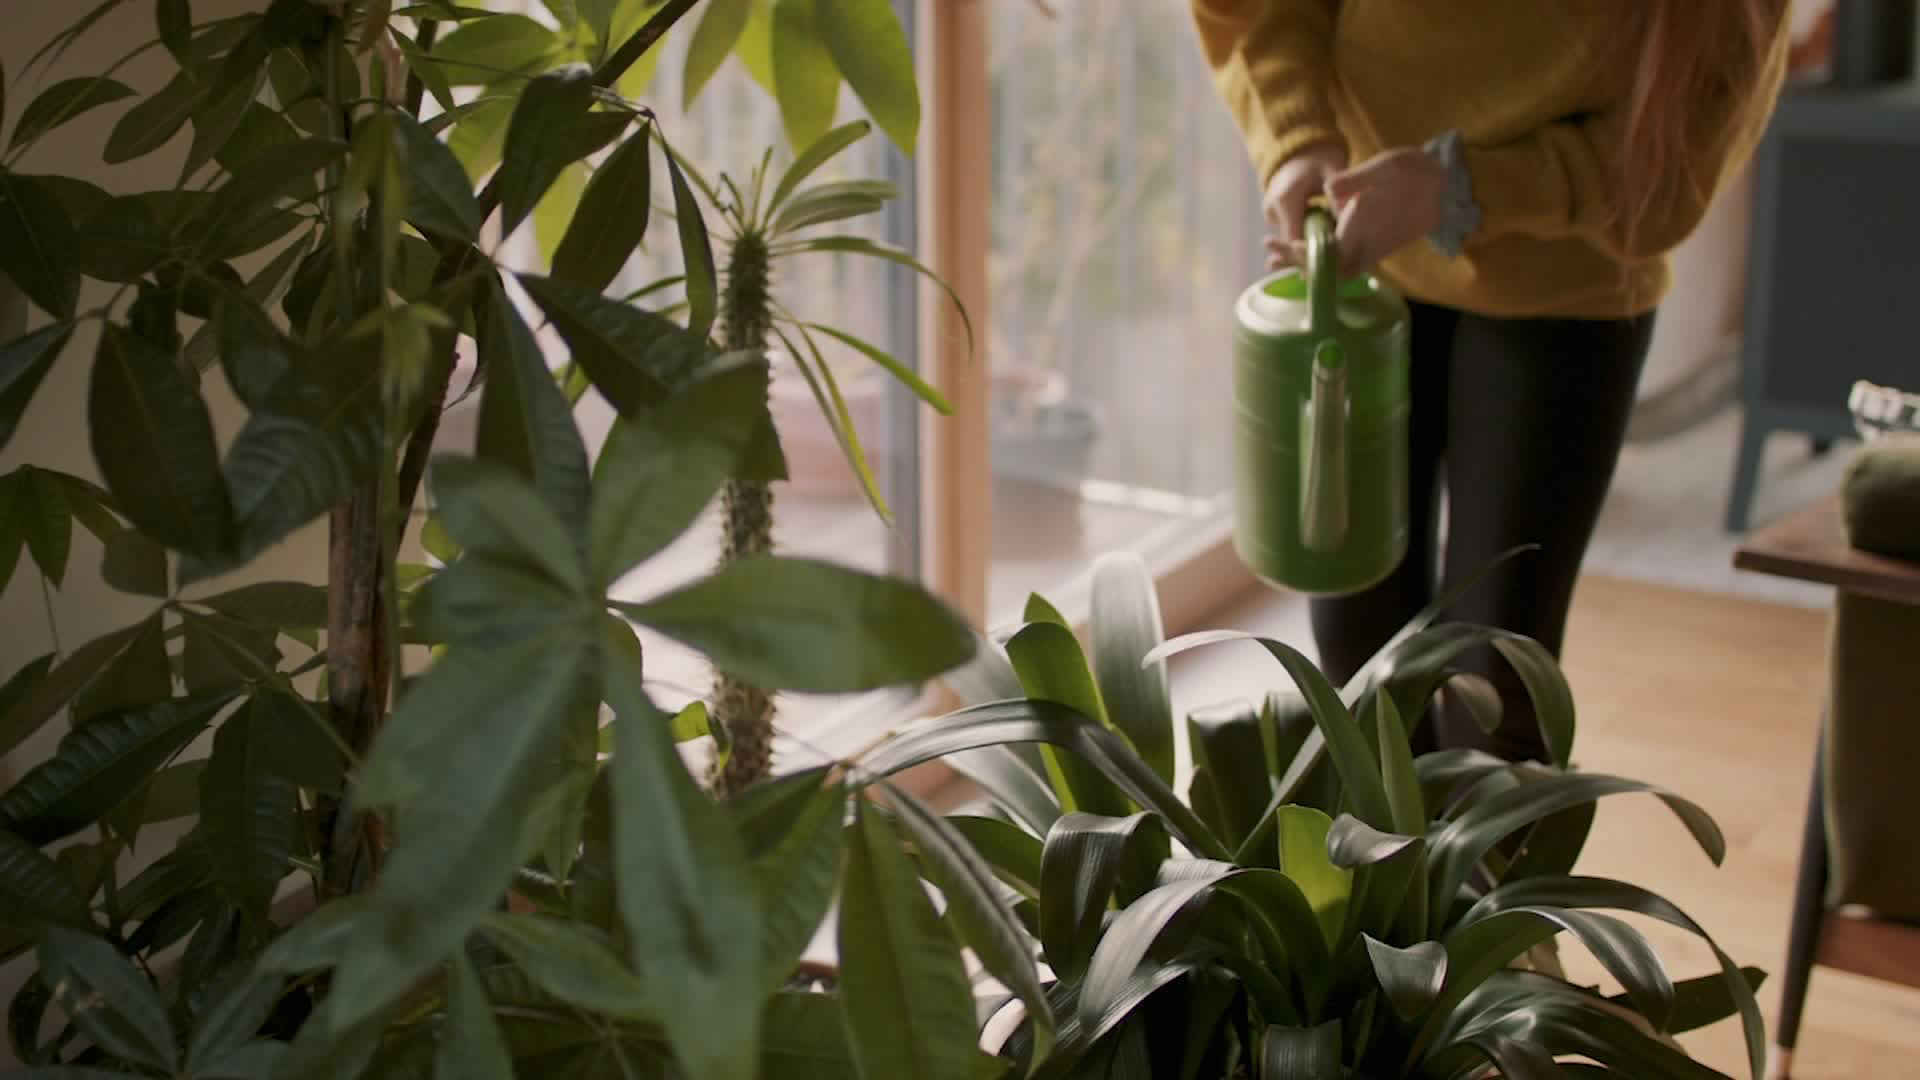 Houseplants Can Remove Toxic Gasoline Fumes, Study Finds